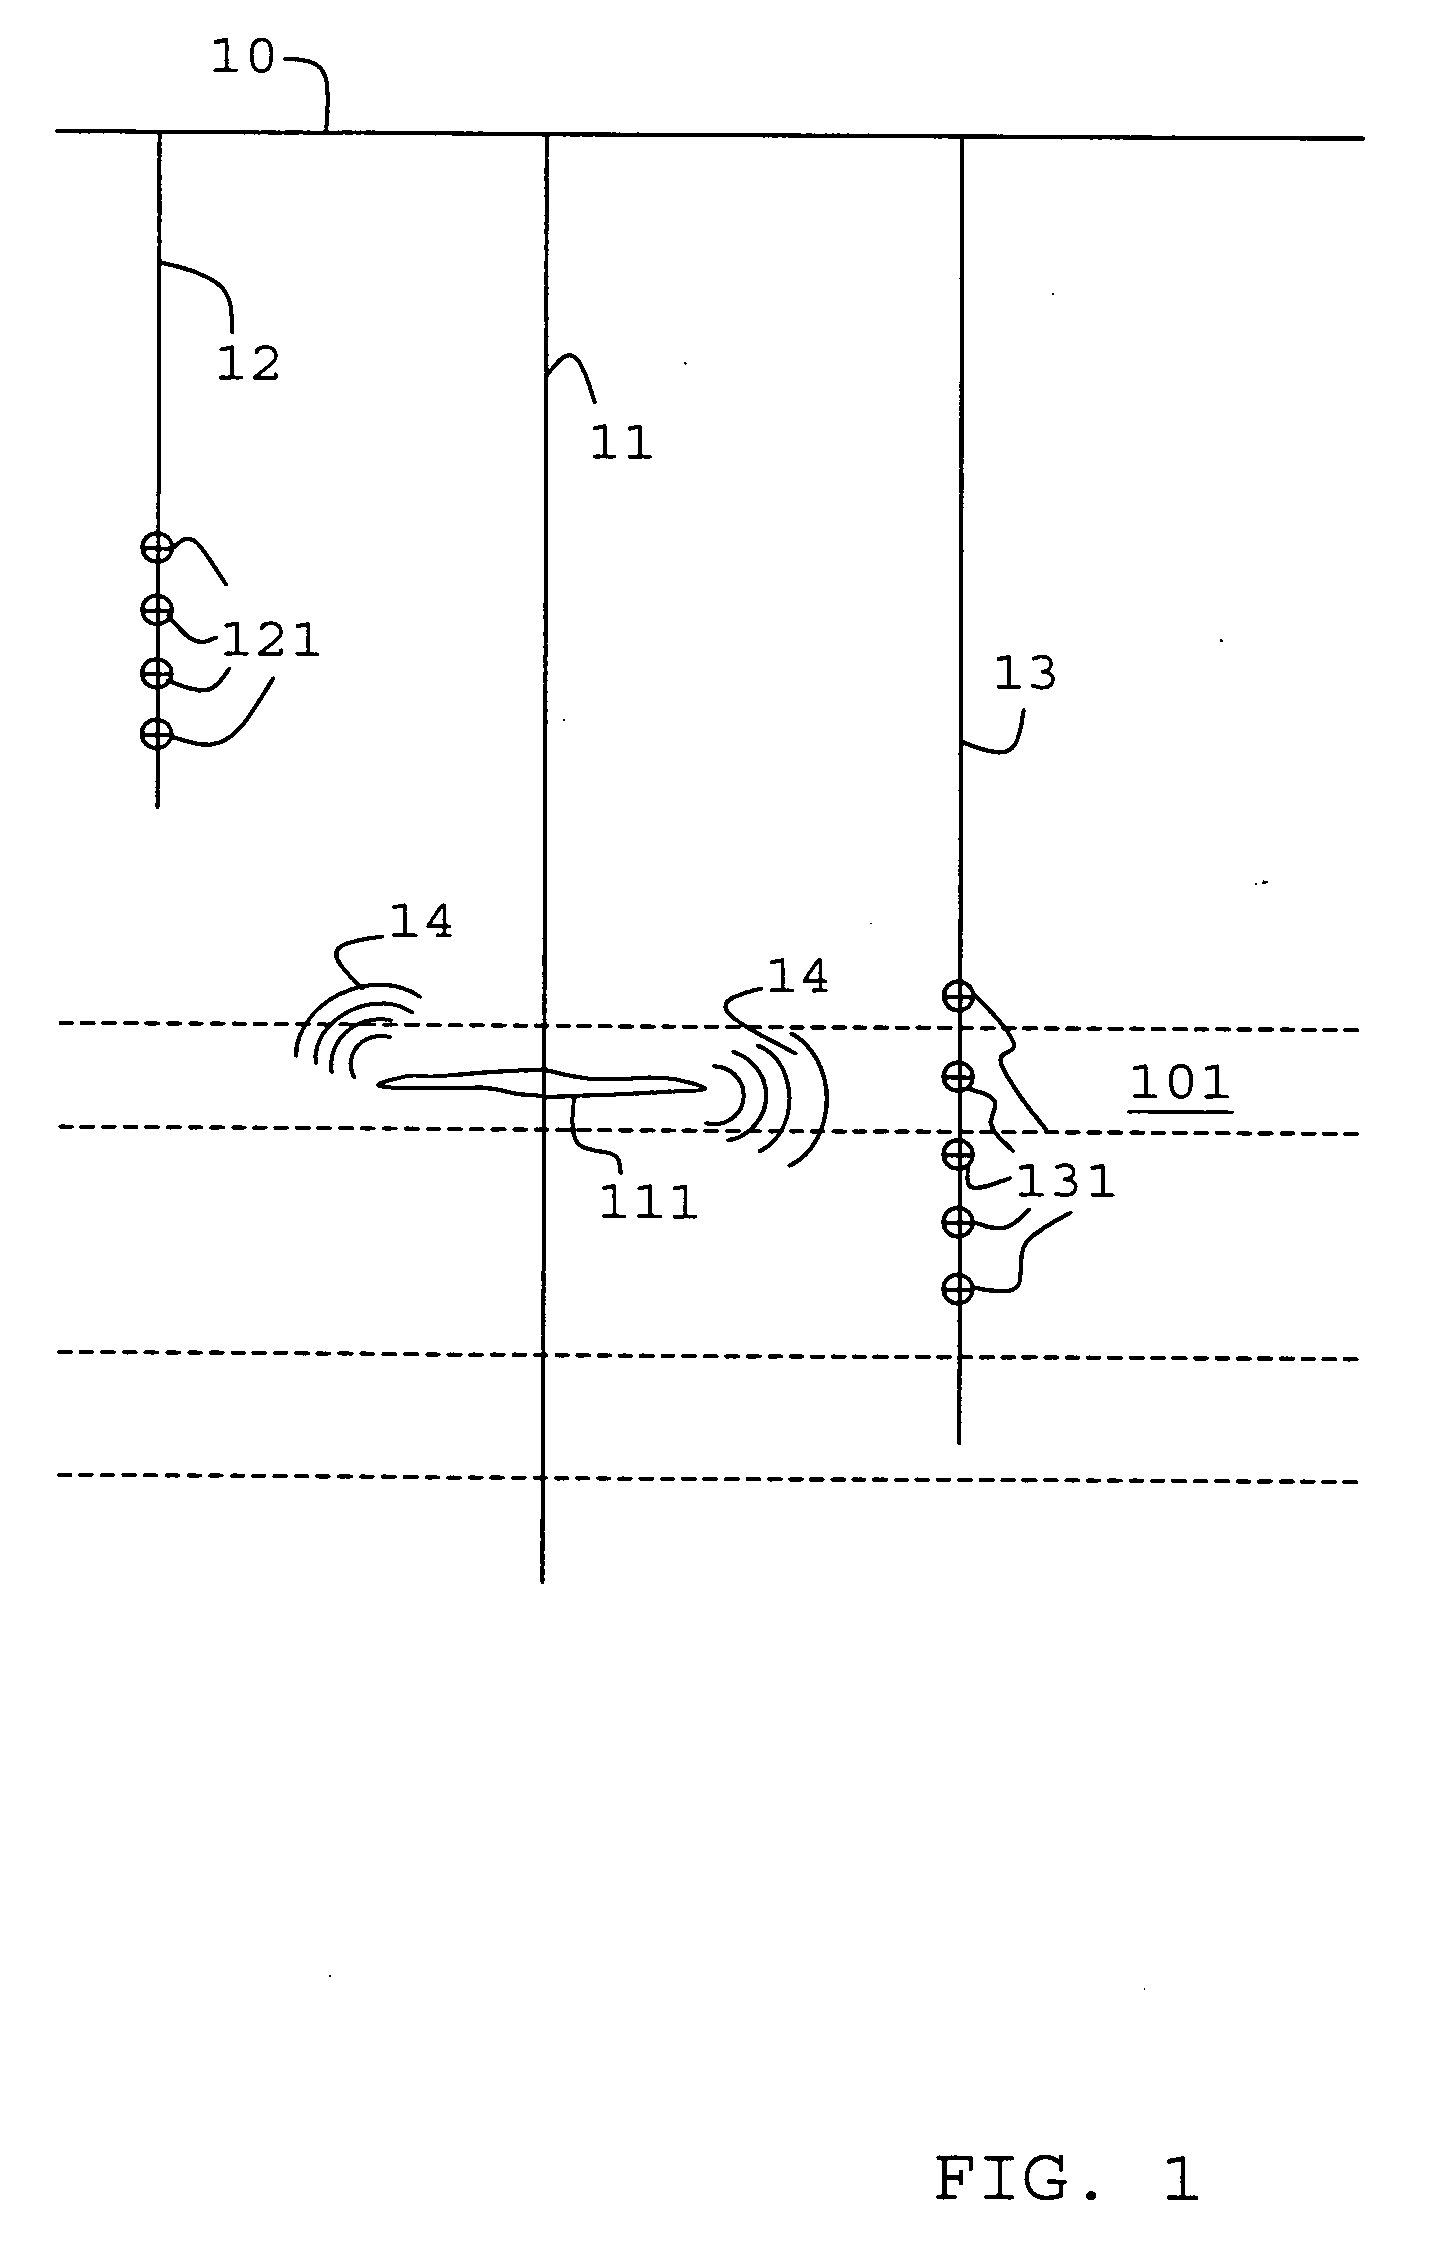 Method for monitoring seismic events